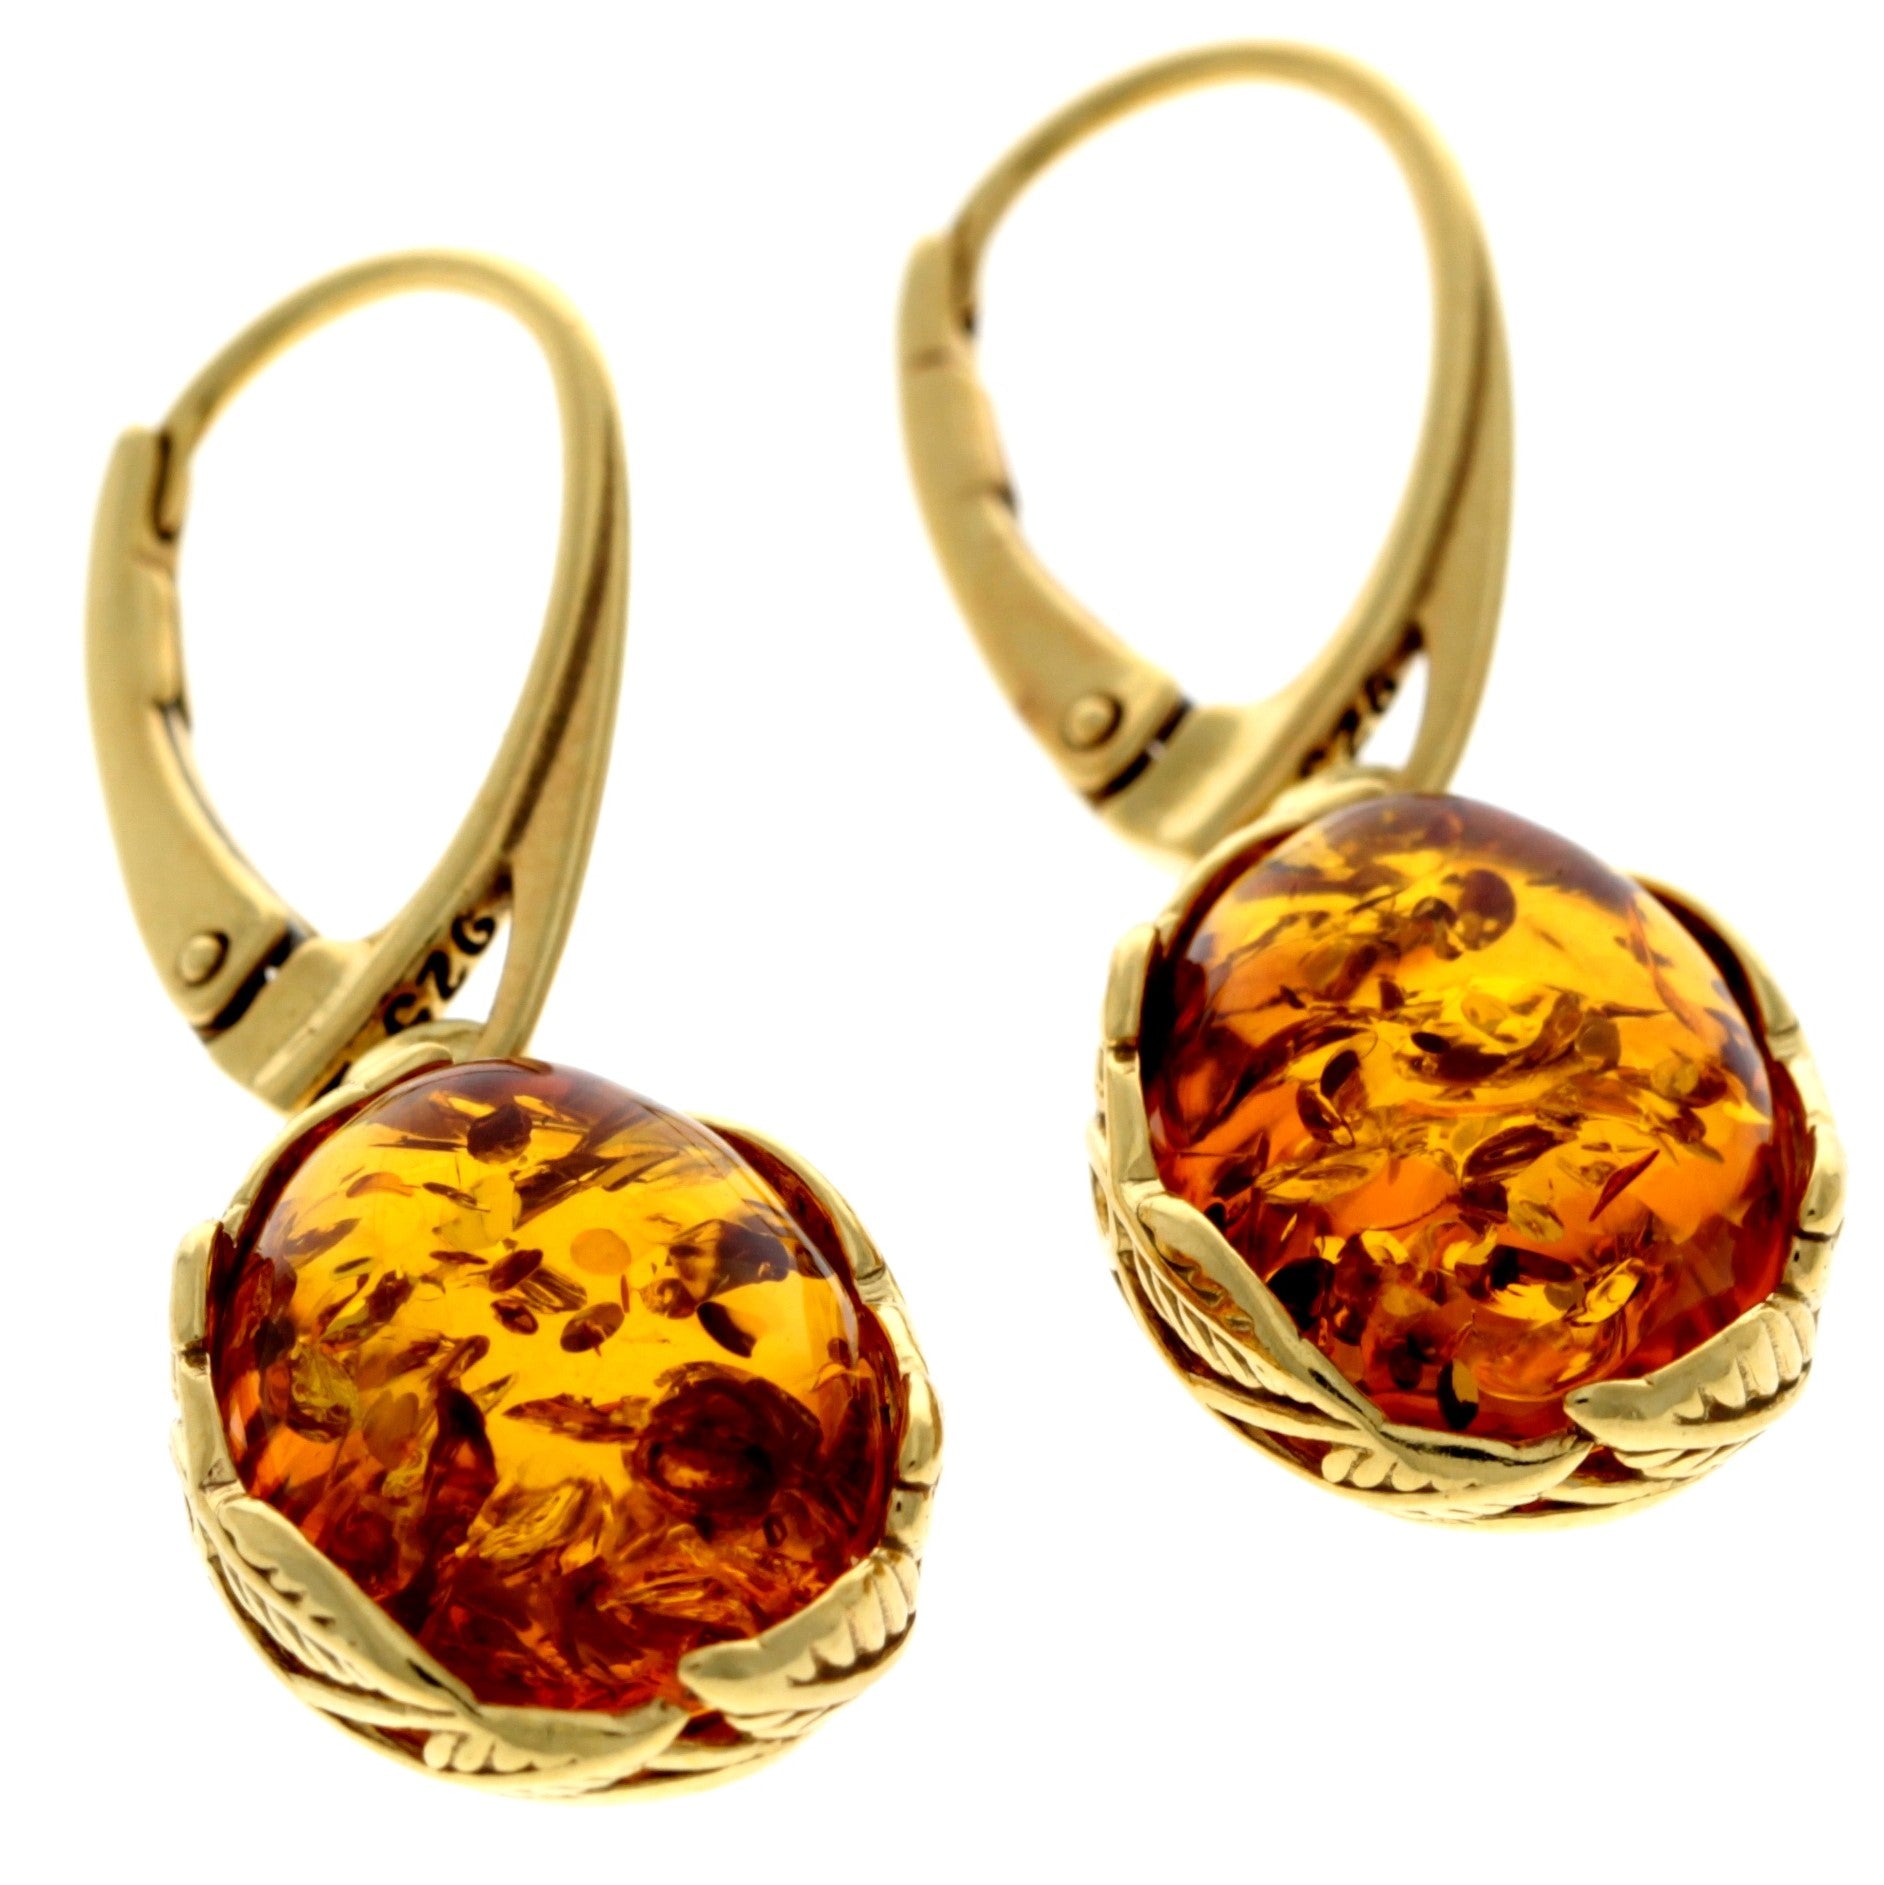 925 Sterling Silver 22 Carat Gold Plated with Genuine Baltic Amber Drop Earrings - MG003